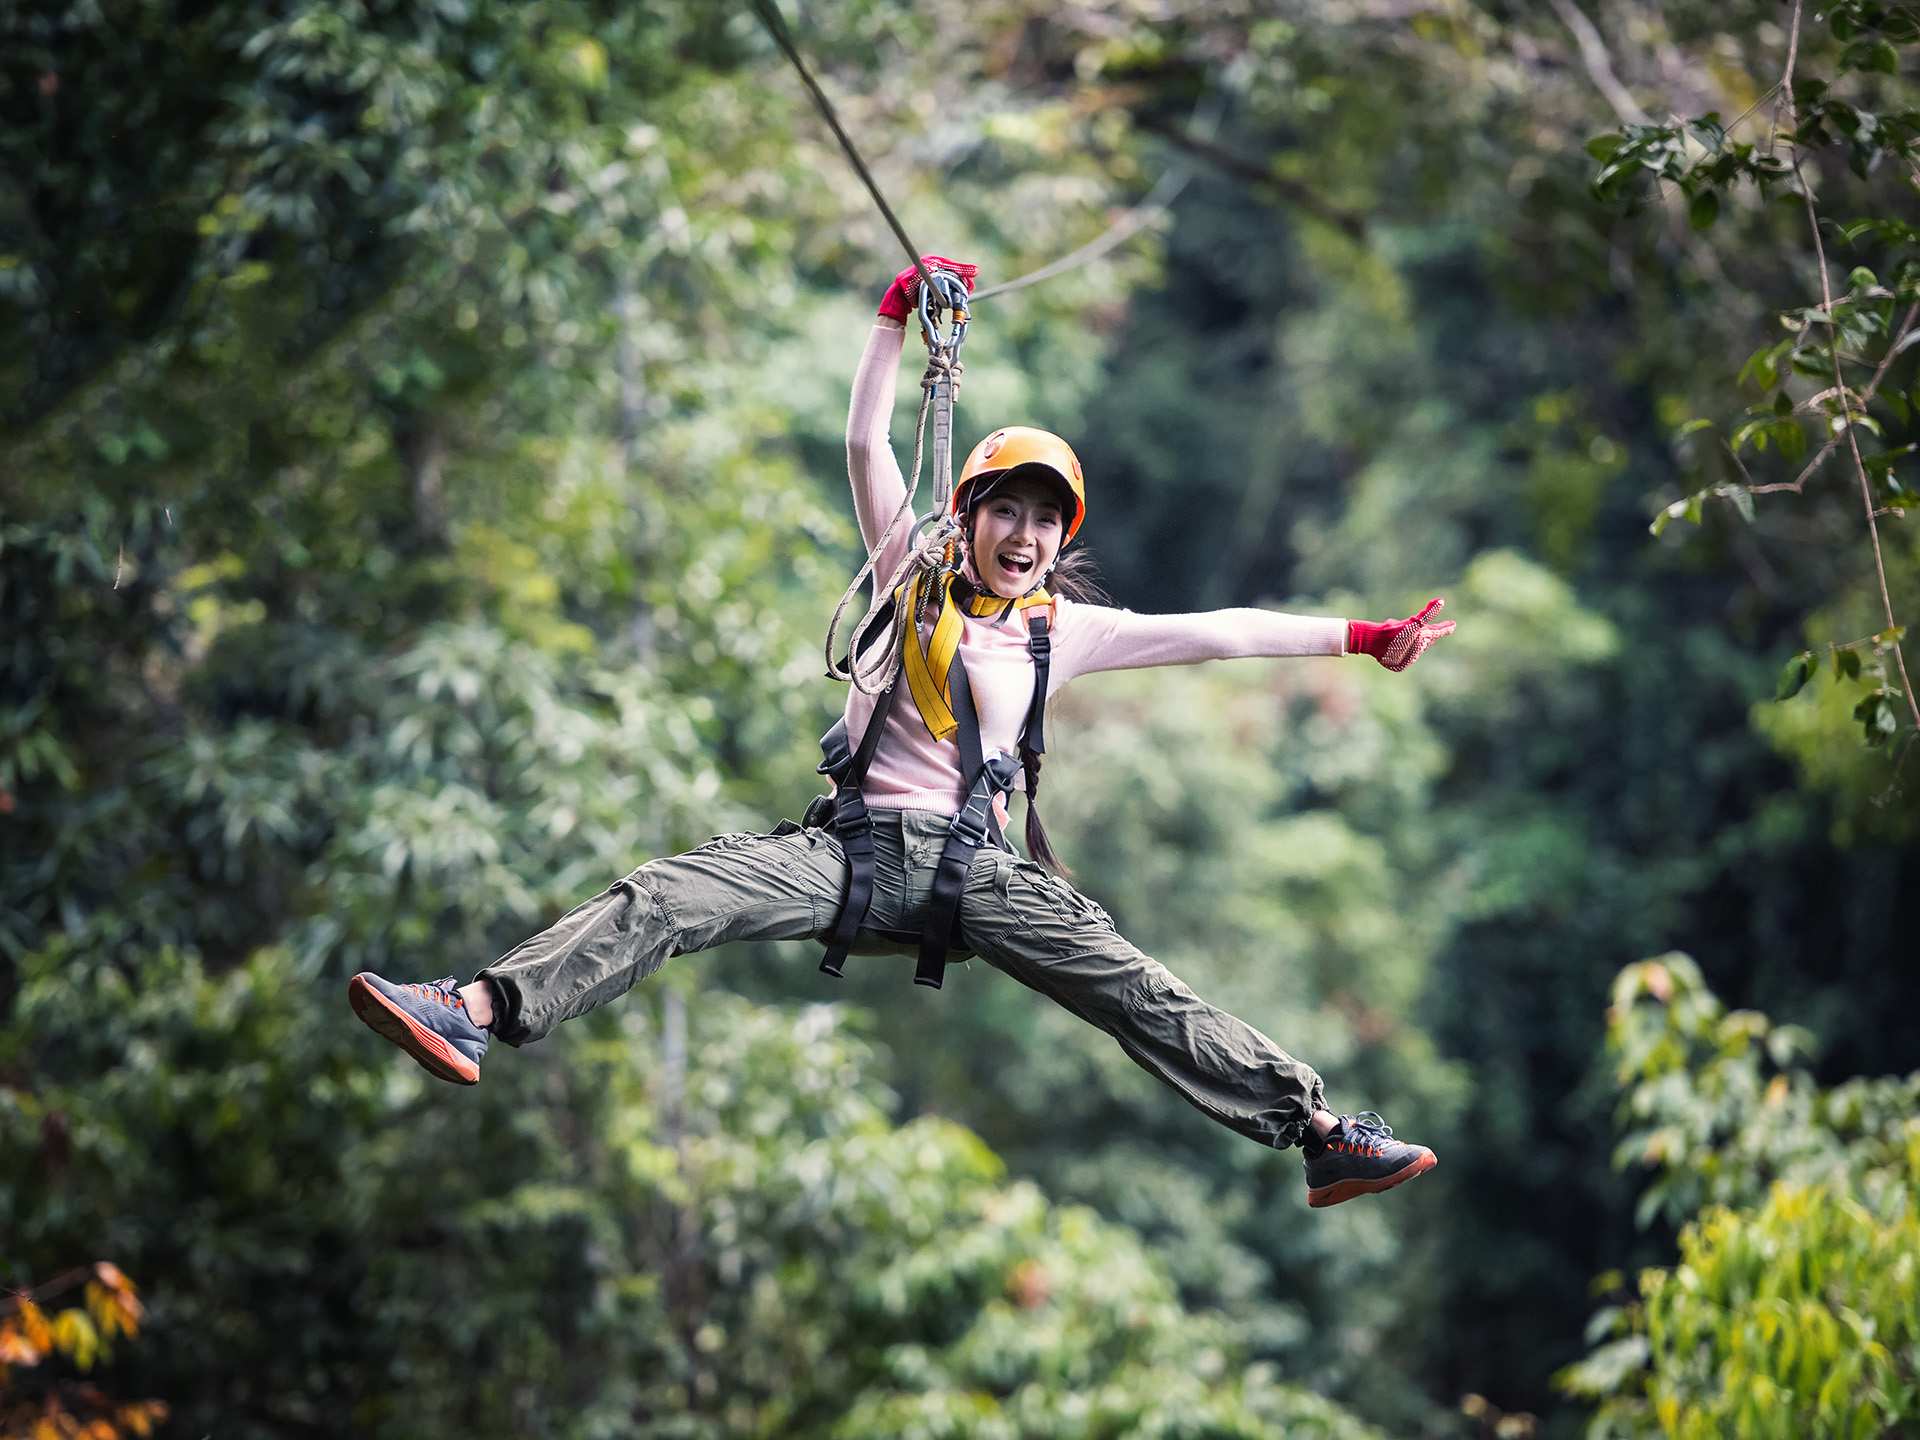 Toronto's Outdoor Adventure Show | Woman zipling with her arms and legs outstretched